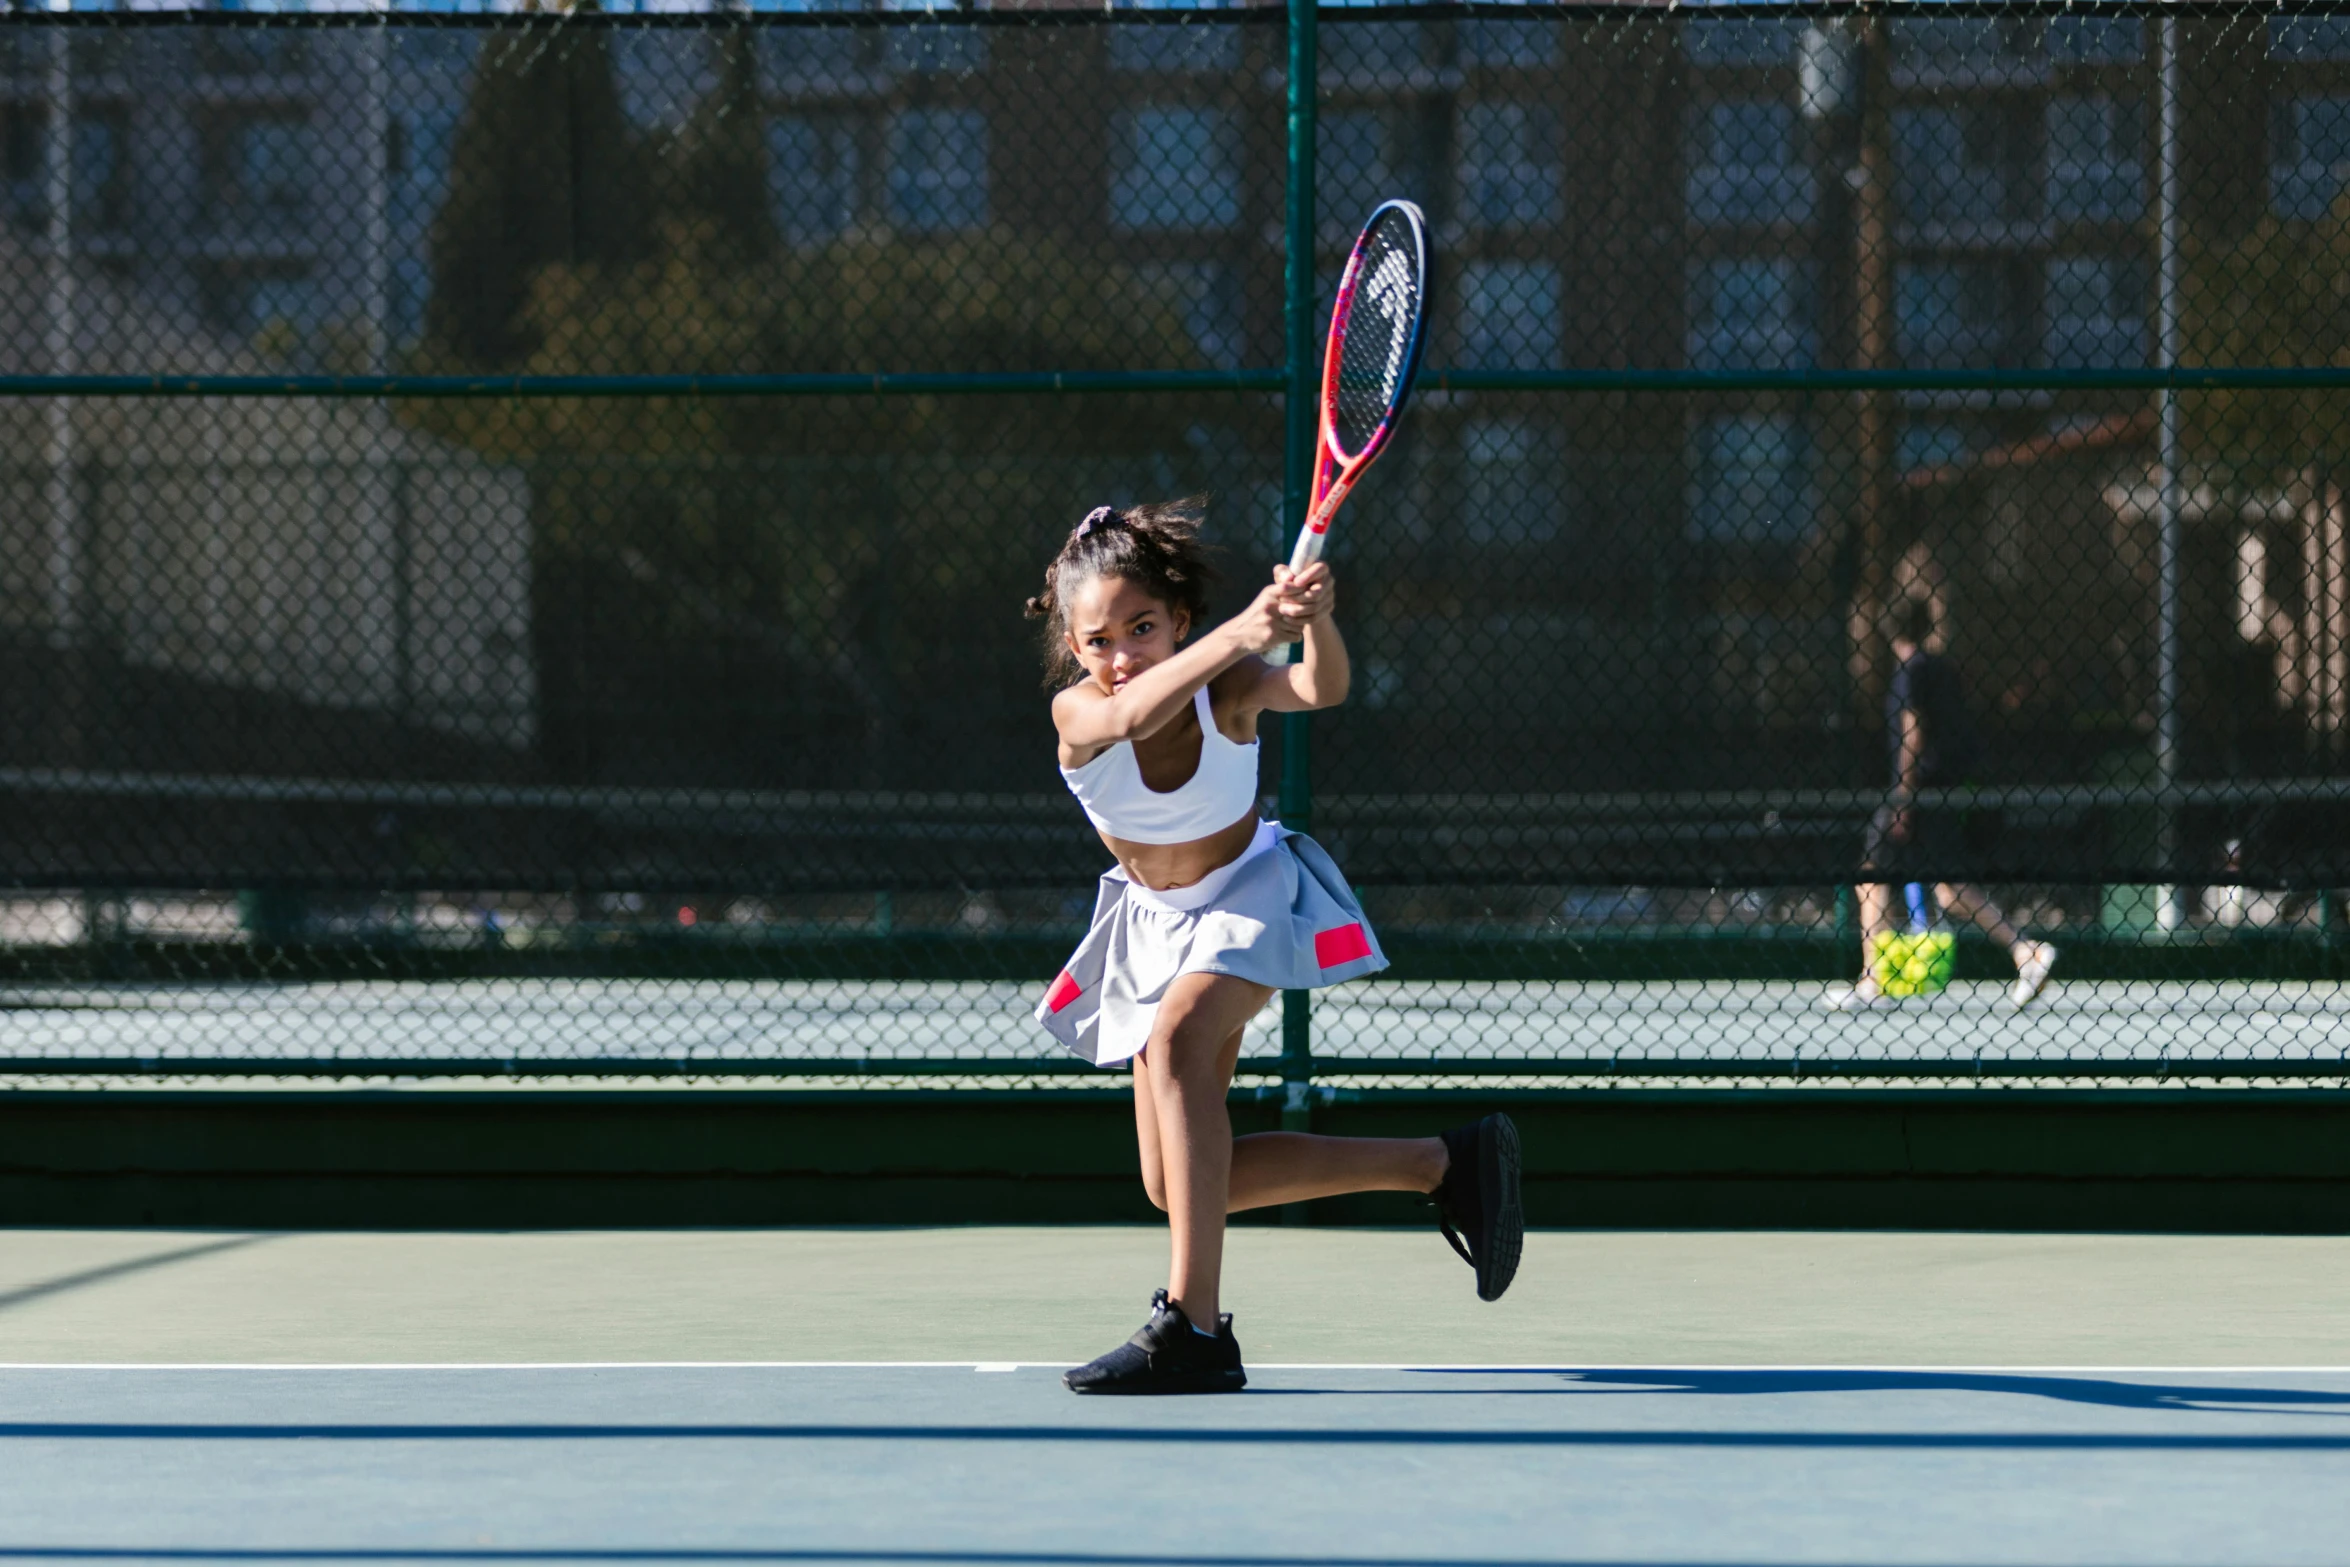 a young girl holding a tennis racquet on a tennis court, unsplash, mid action swing, jen atkin, panoramic view of girl, mai anh tran